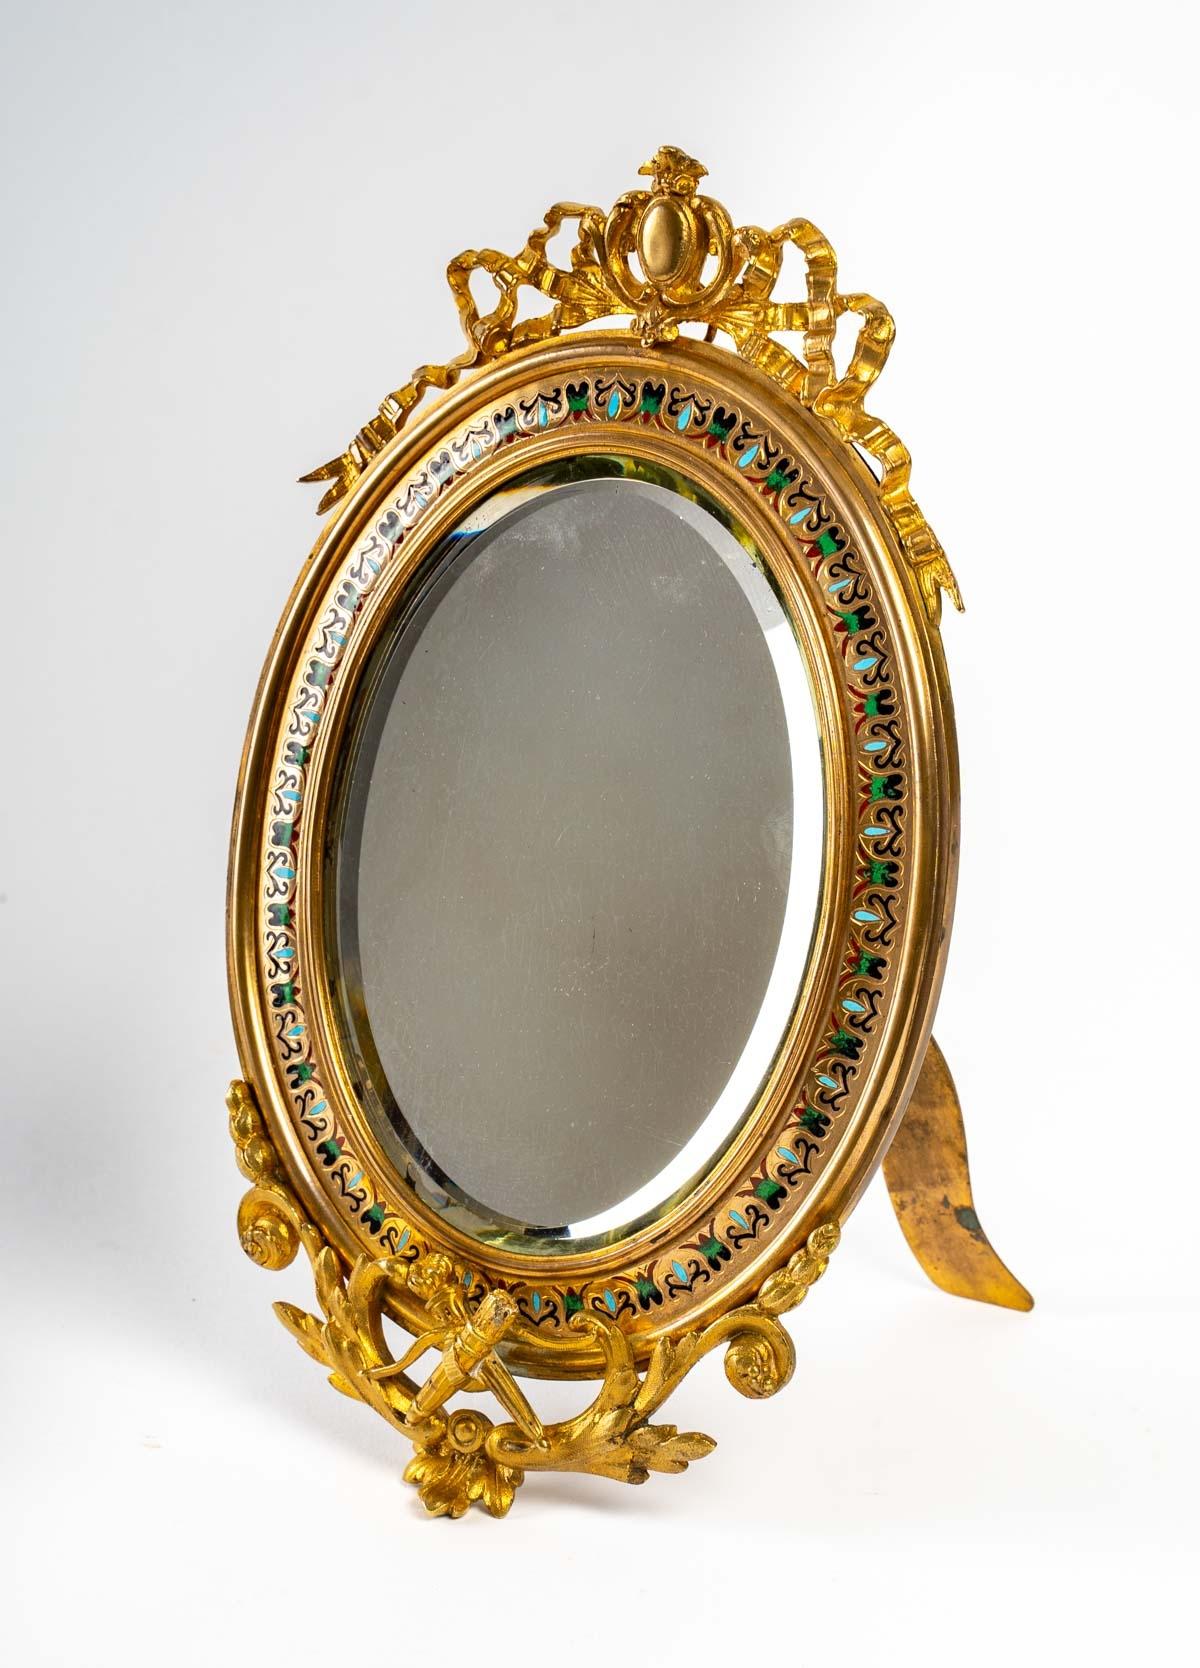 Pretty small table mirror in gold bronze and cloisonné
Louis XV style, in perfect condition
Late 19th century
Measures: Height 26 cm, width 15 cm.